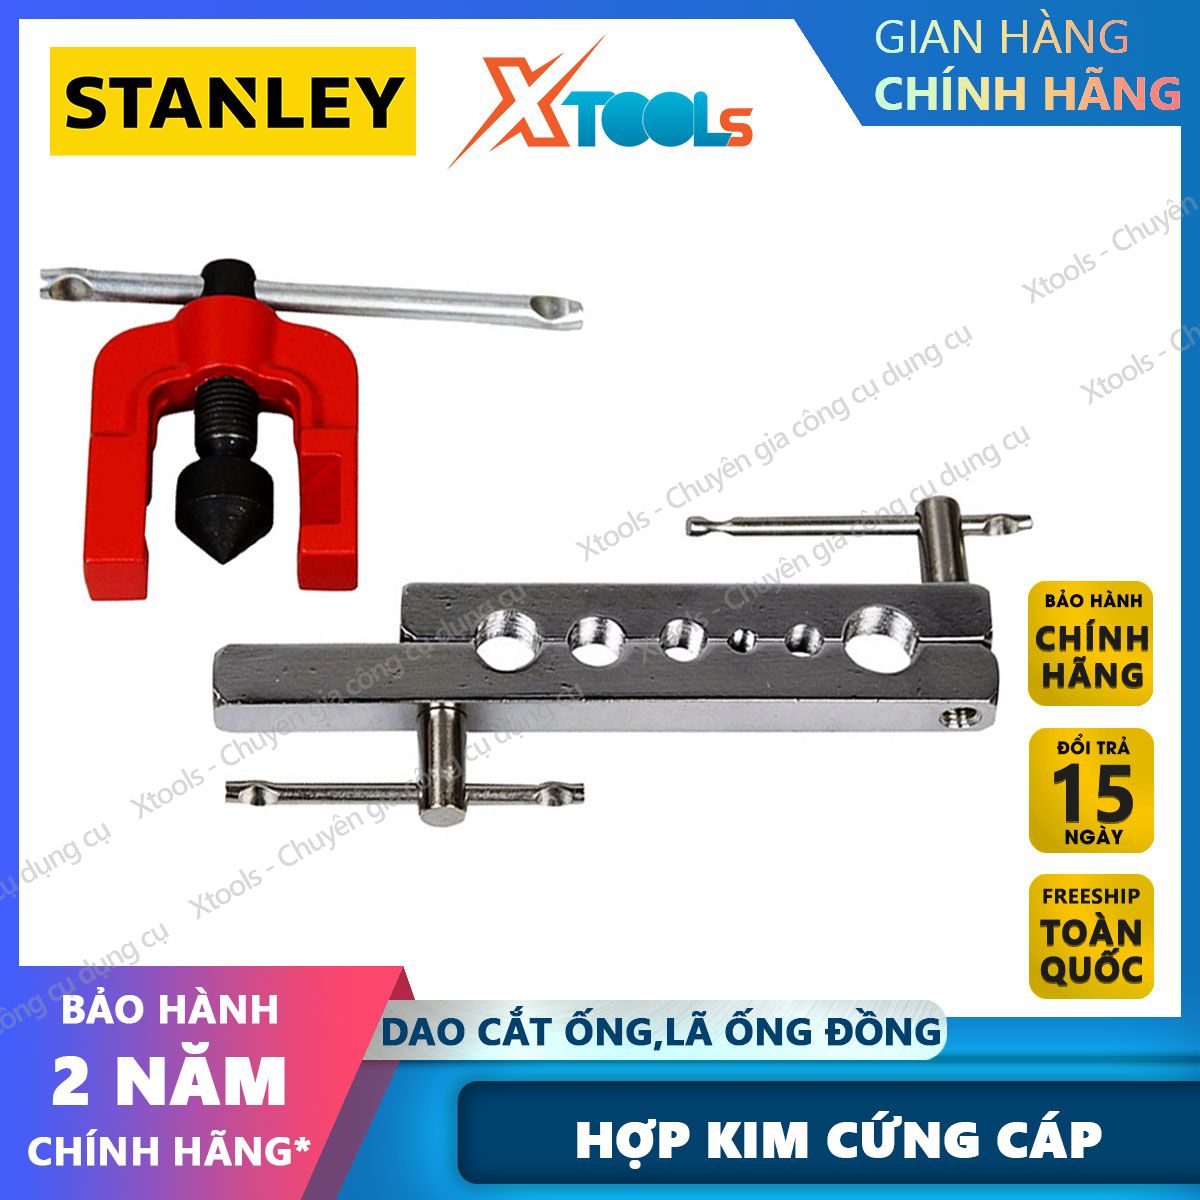 Stanley 93-040 bronzing tie cutter the metal tube cutter is made of high